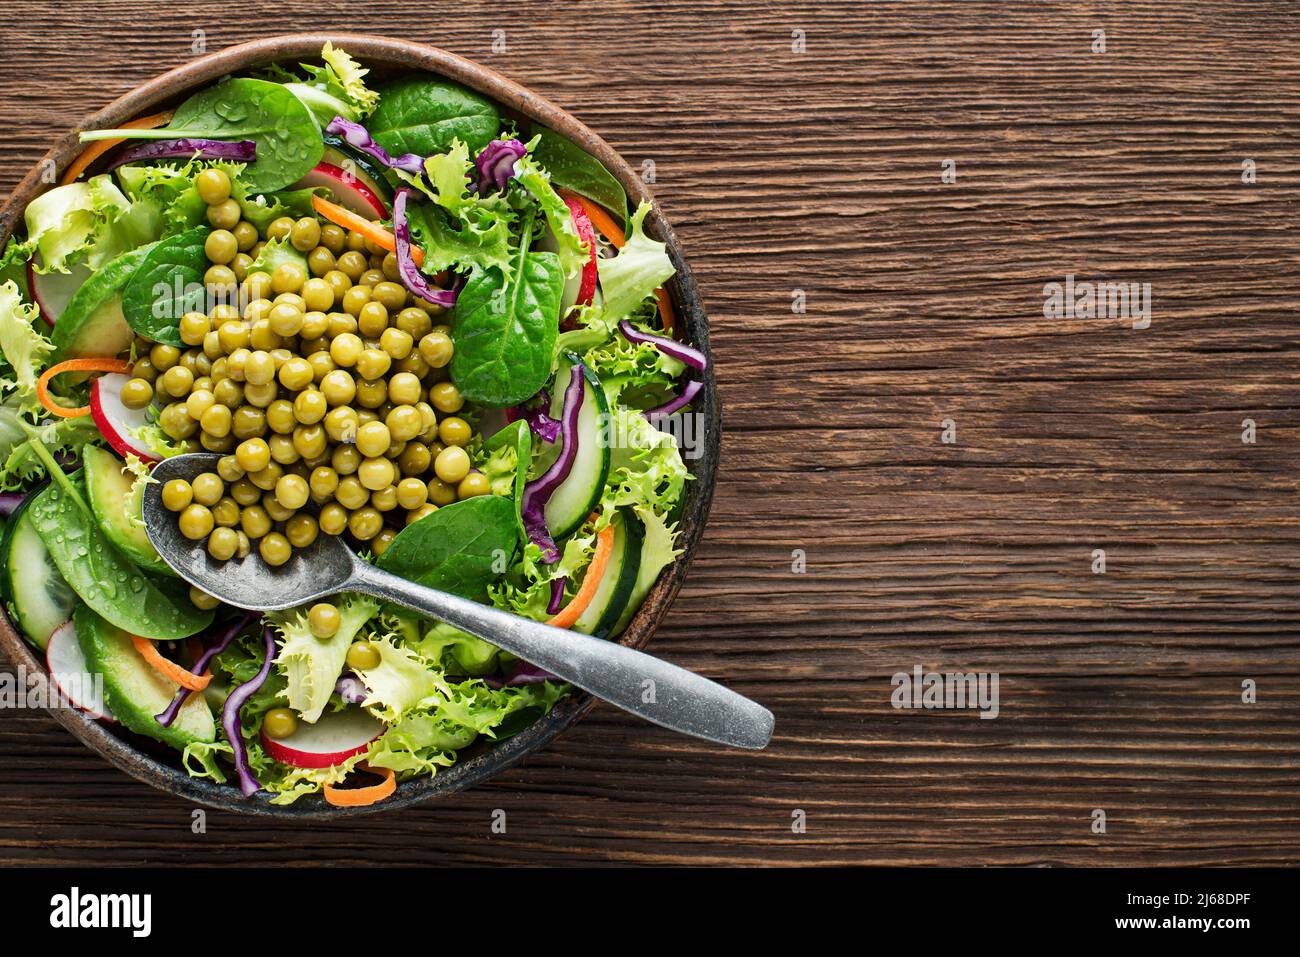 Green lettuce salad meal with fresh vegetables and cooked peas on wooden table background Stock Photo